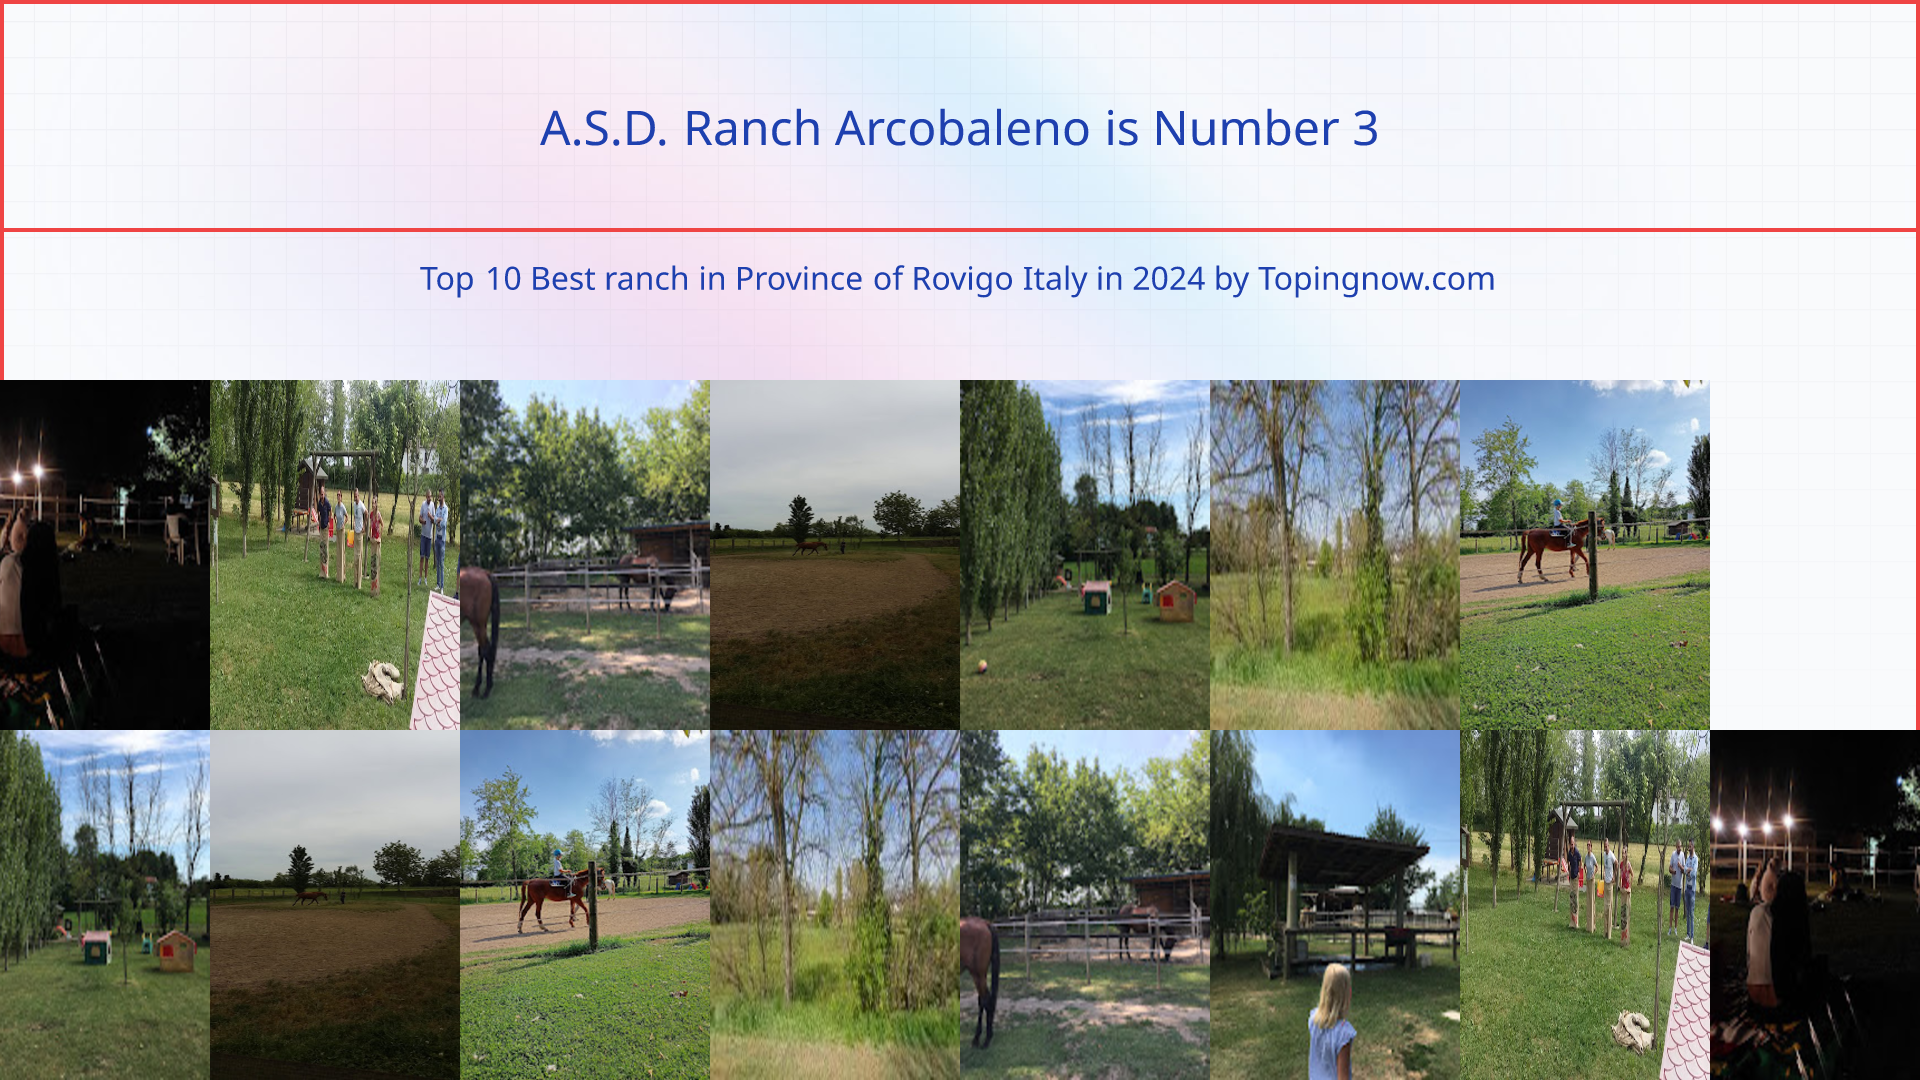 A.S.D. Ranch Arcobaleno: Top 10 Best ranch in Province of Rovigo Italy in 2024